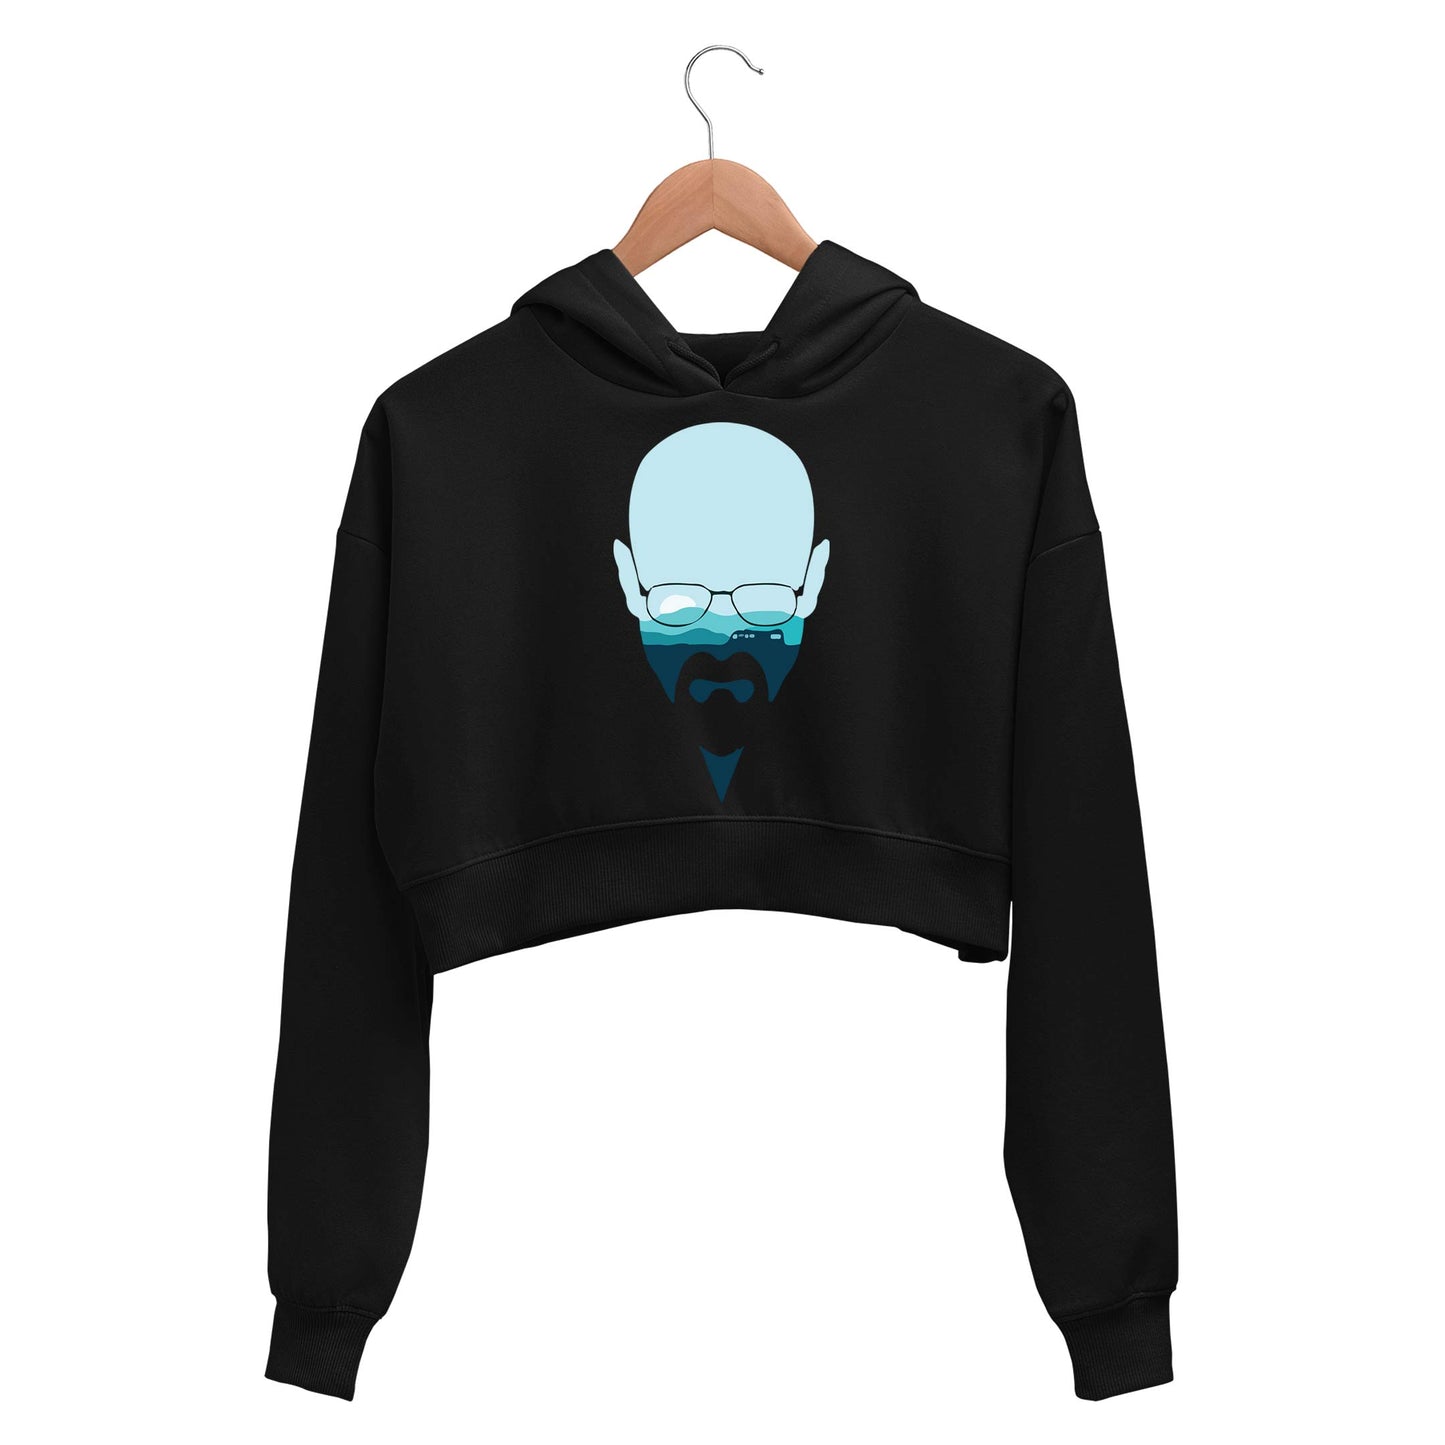 Breaking Bad Crop Hoodie - On Sale - S (Chest size 34 IN)